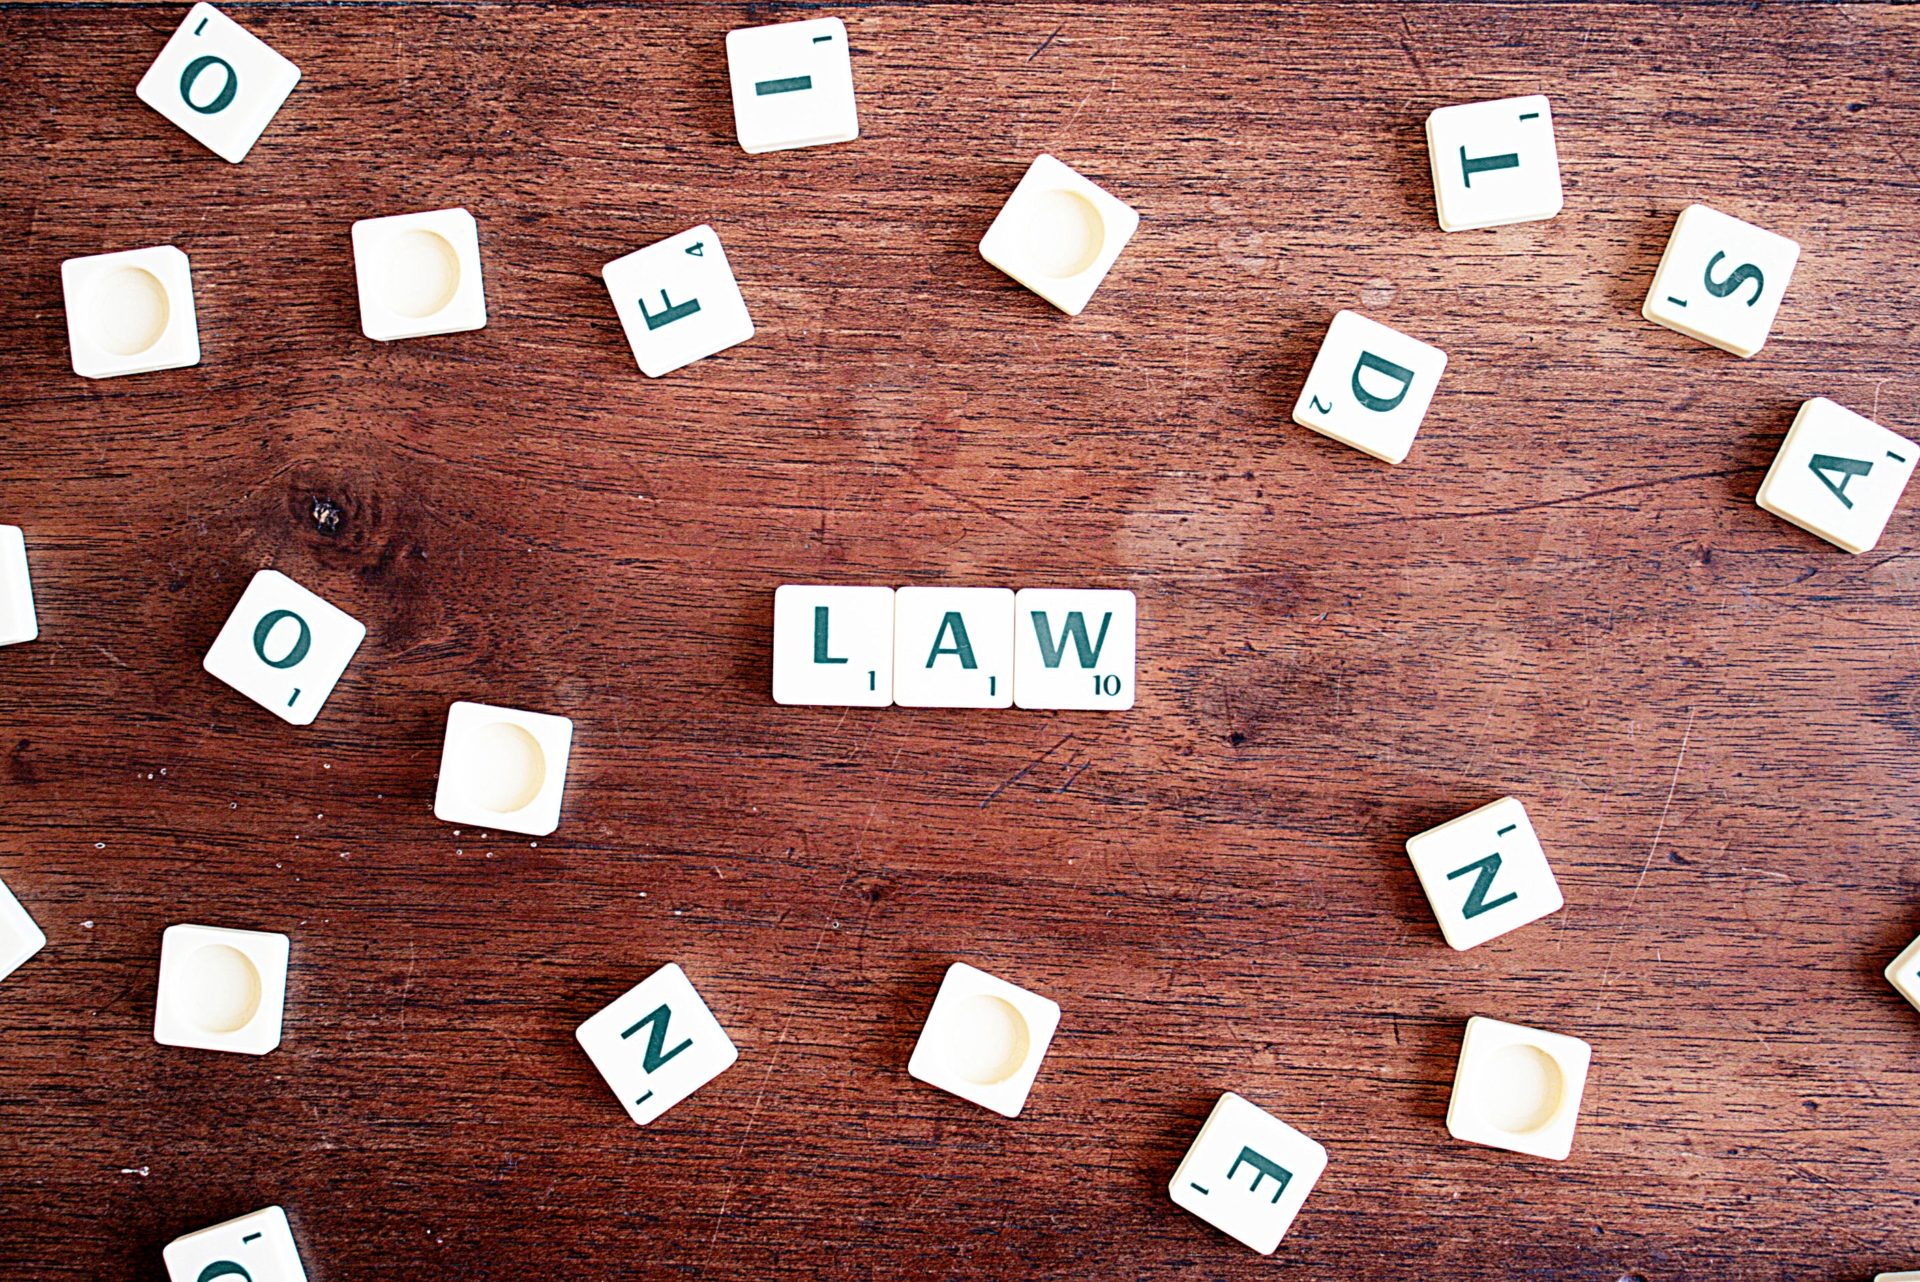 Paralegal law spelled out in scrabble letters